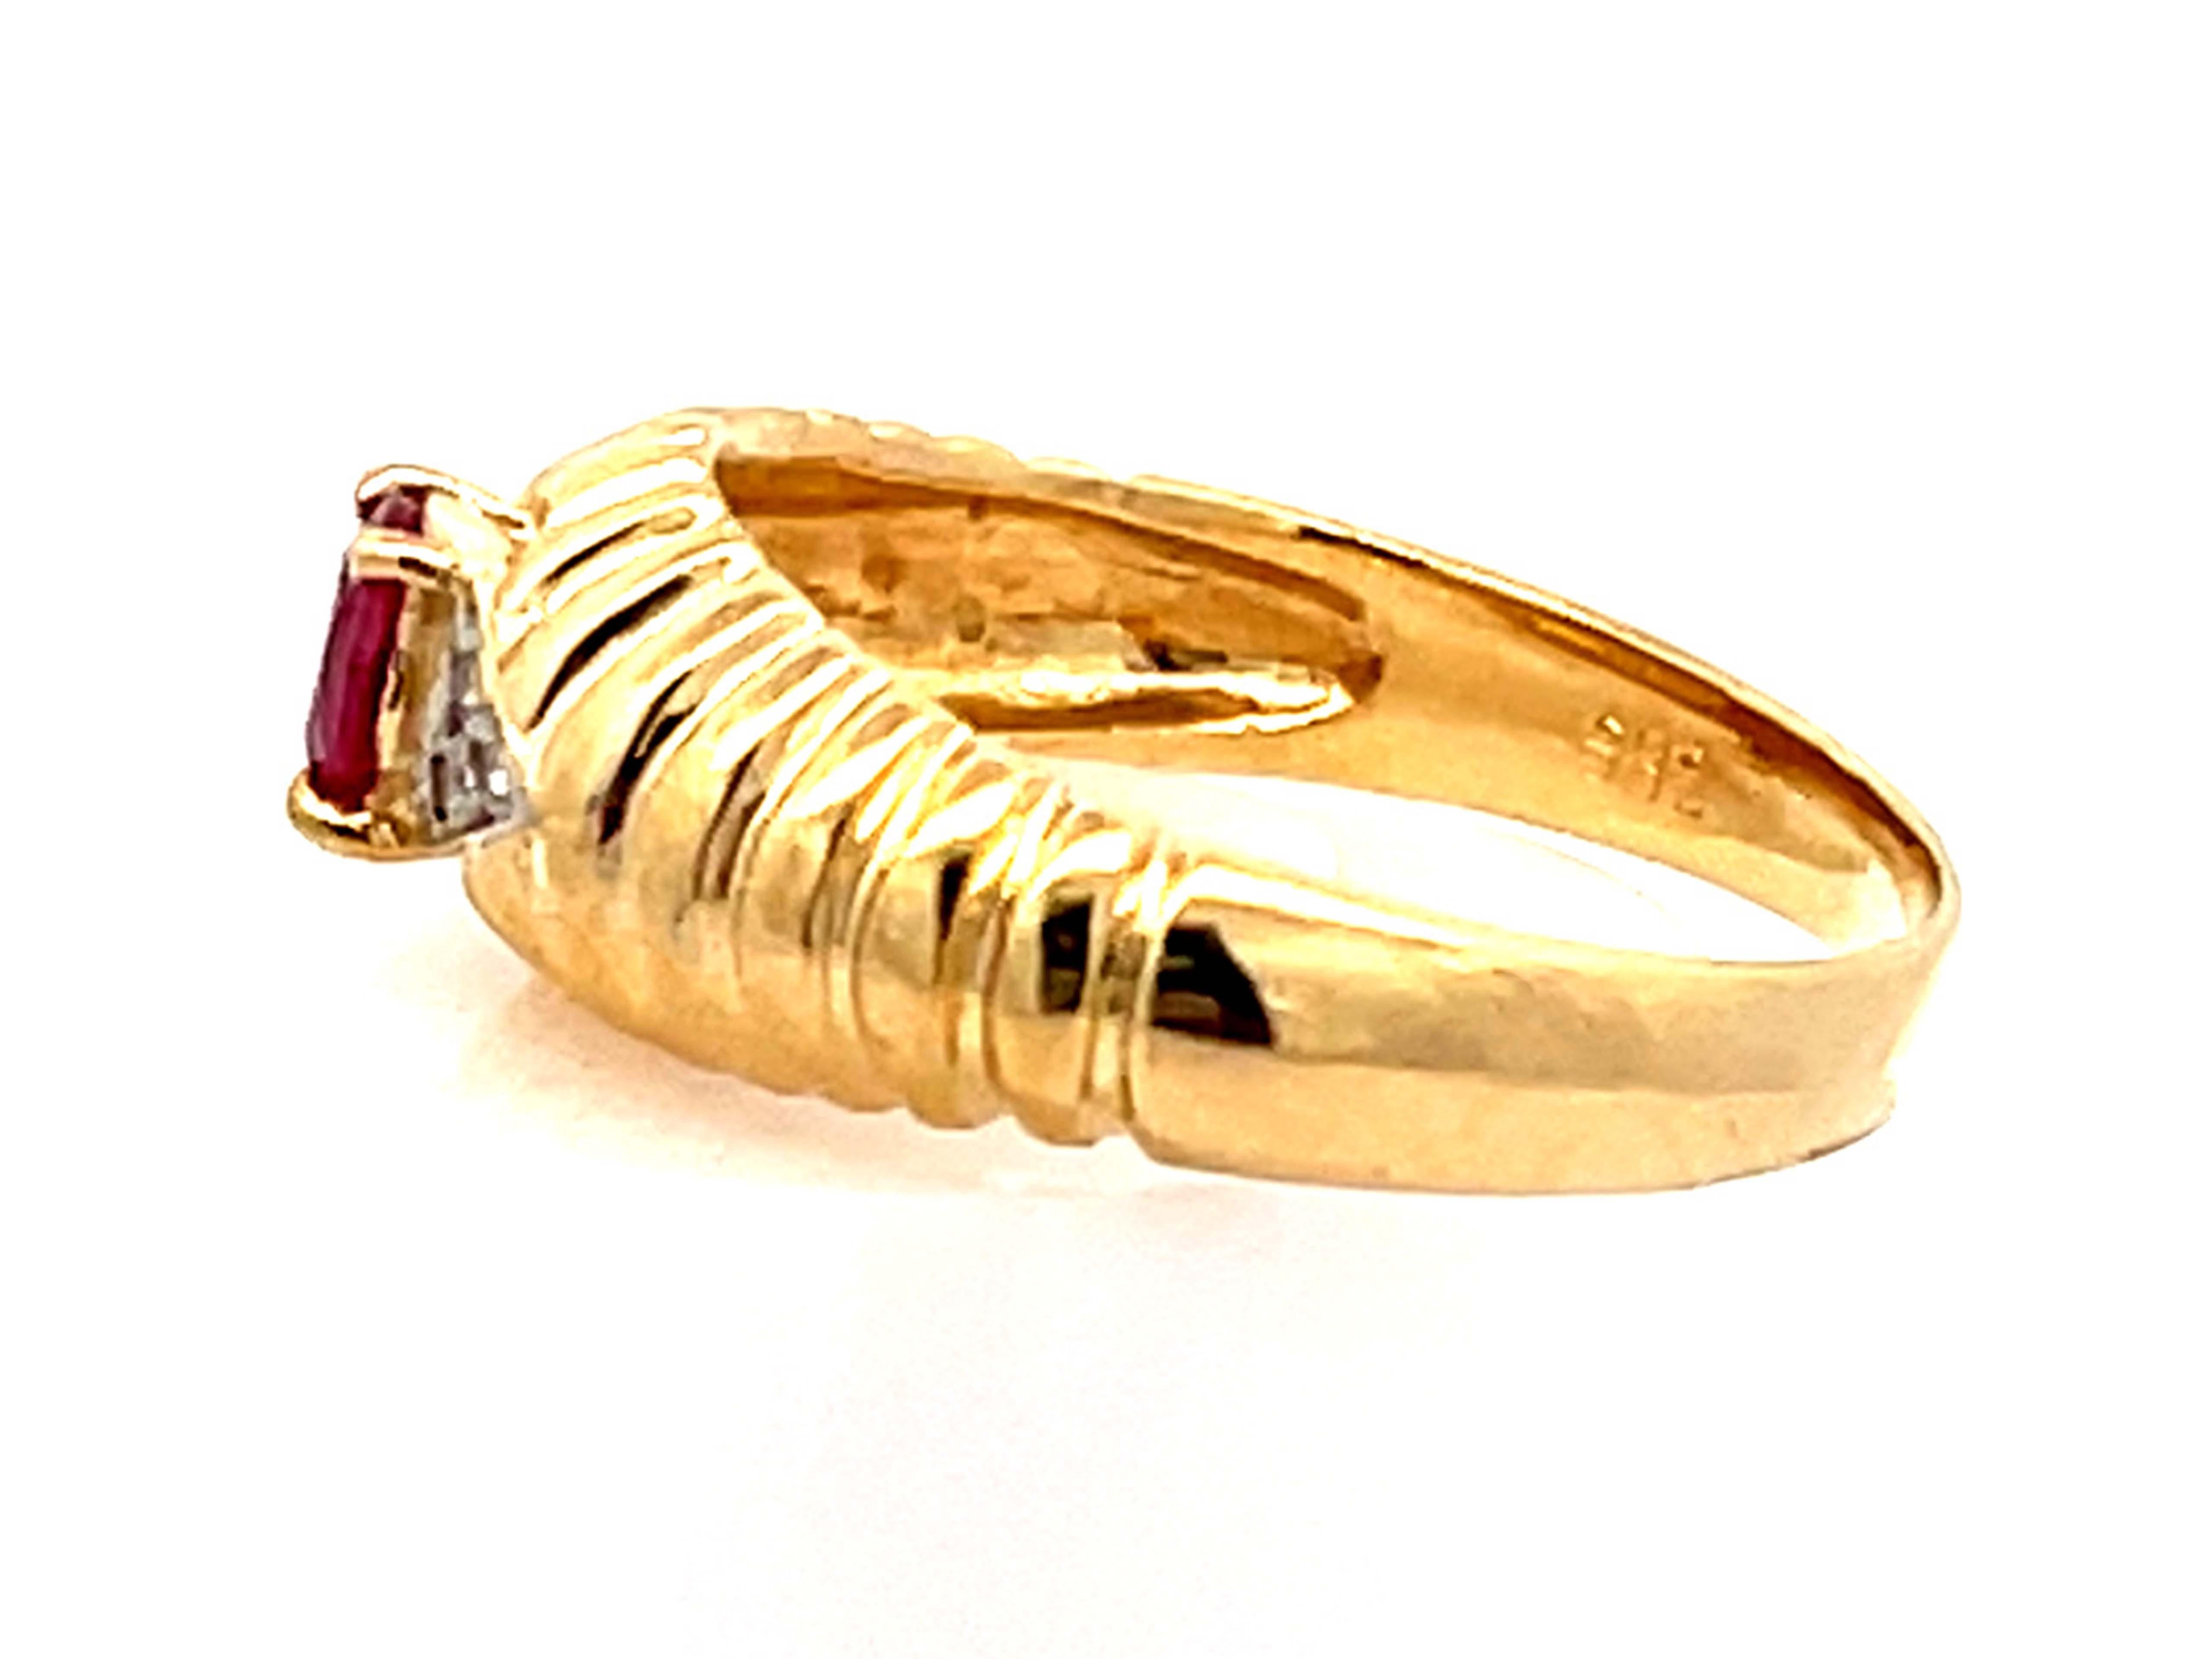 Vintage Ruby and Diamond Band Ring in 14k Yellow Gold In Excellent Condition For Sale In Honolulu, HI